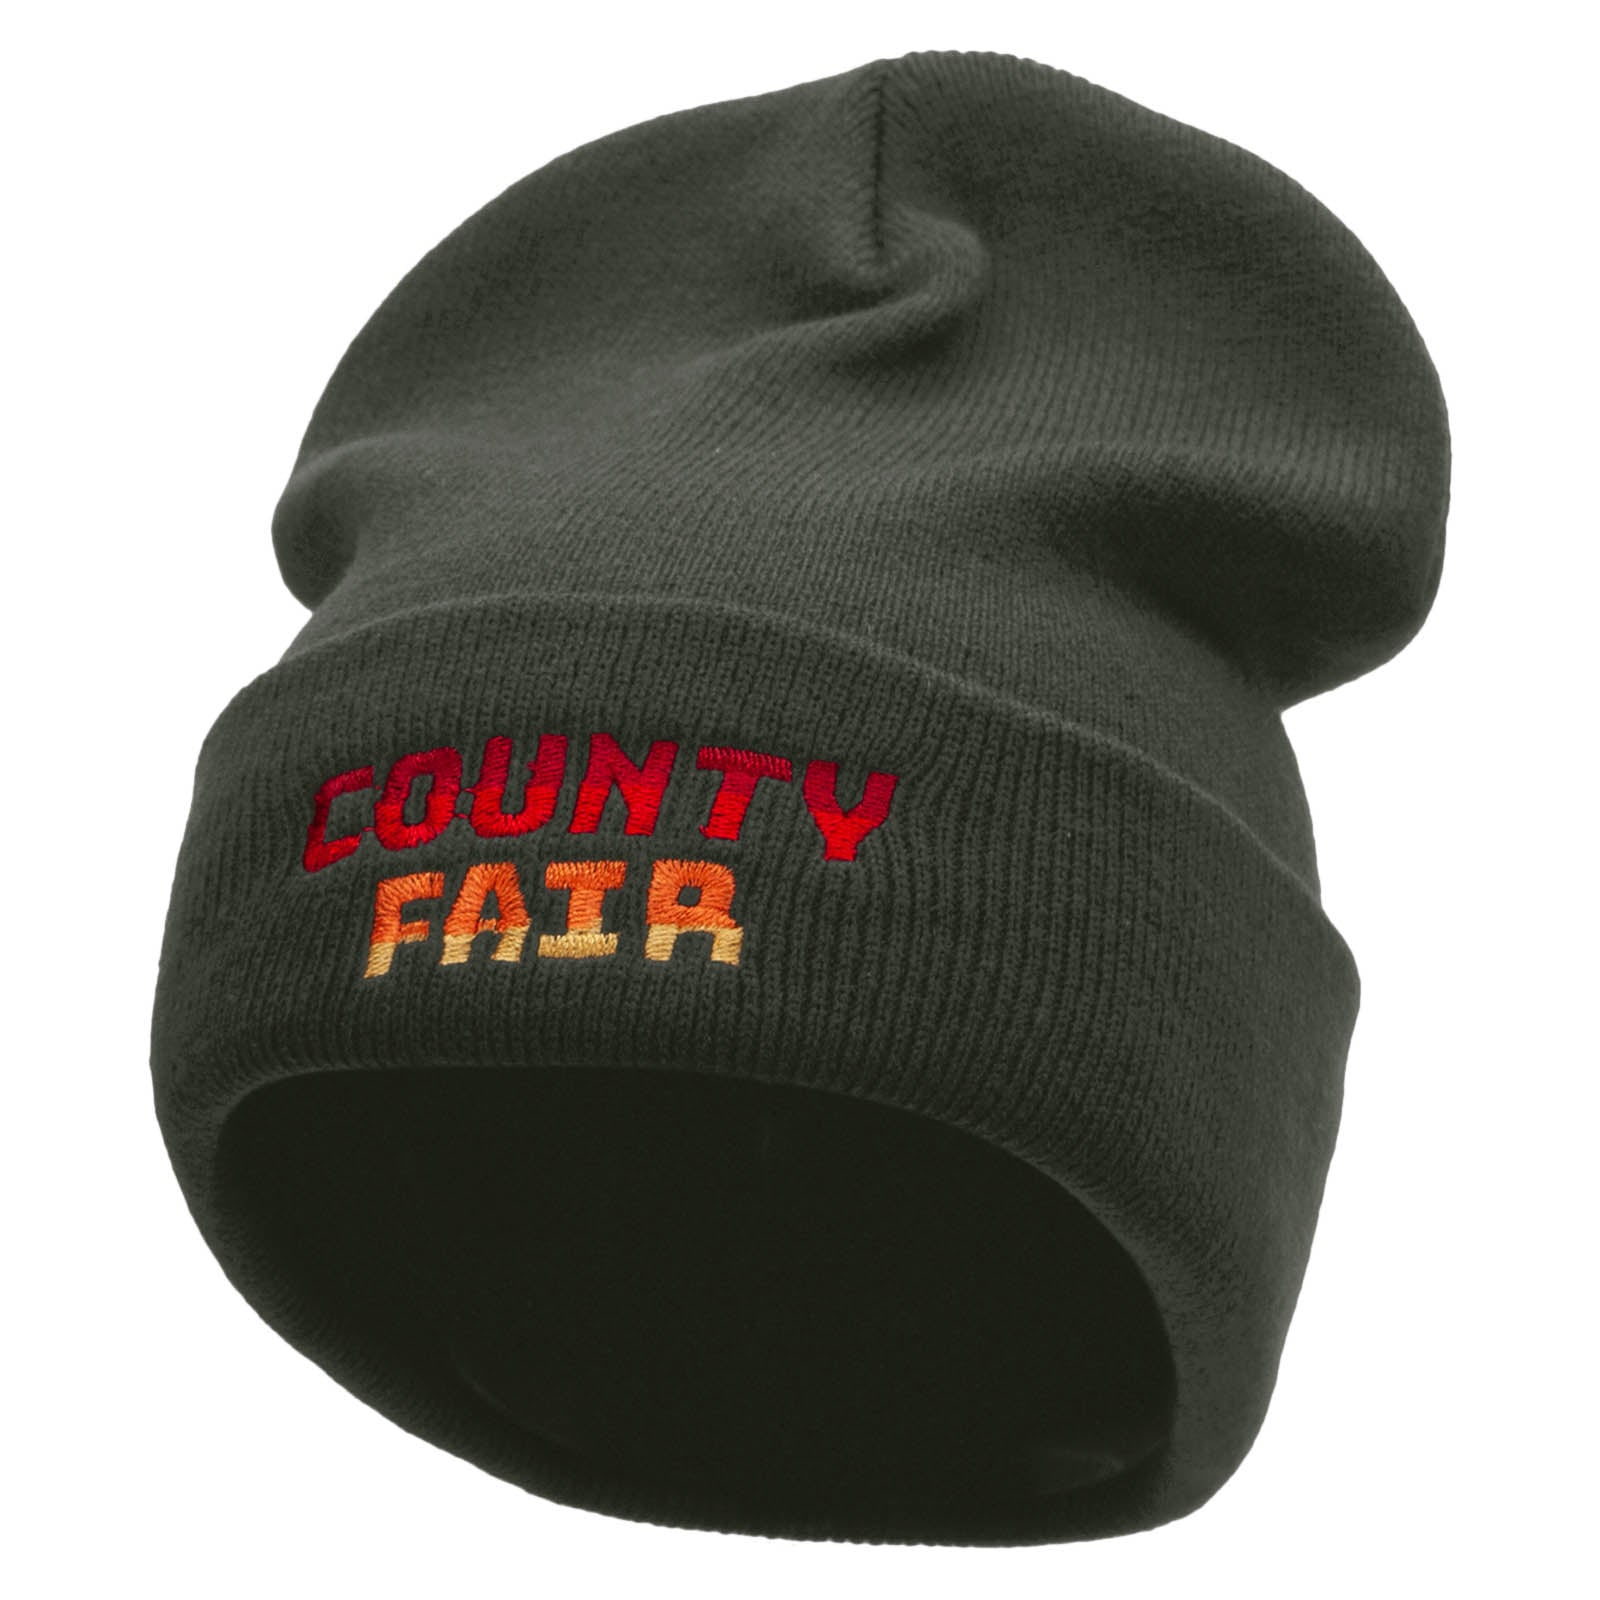 County Fair Embroidered 12 Inch Long Knitted Beanie - Dk Grey OSFM